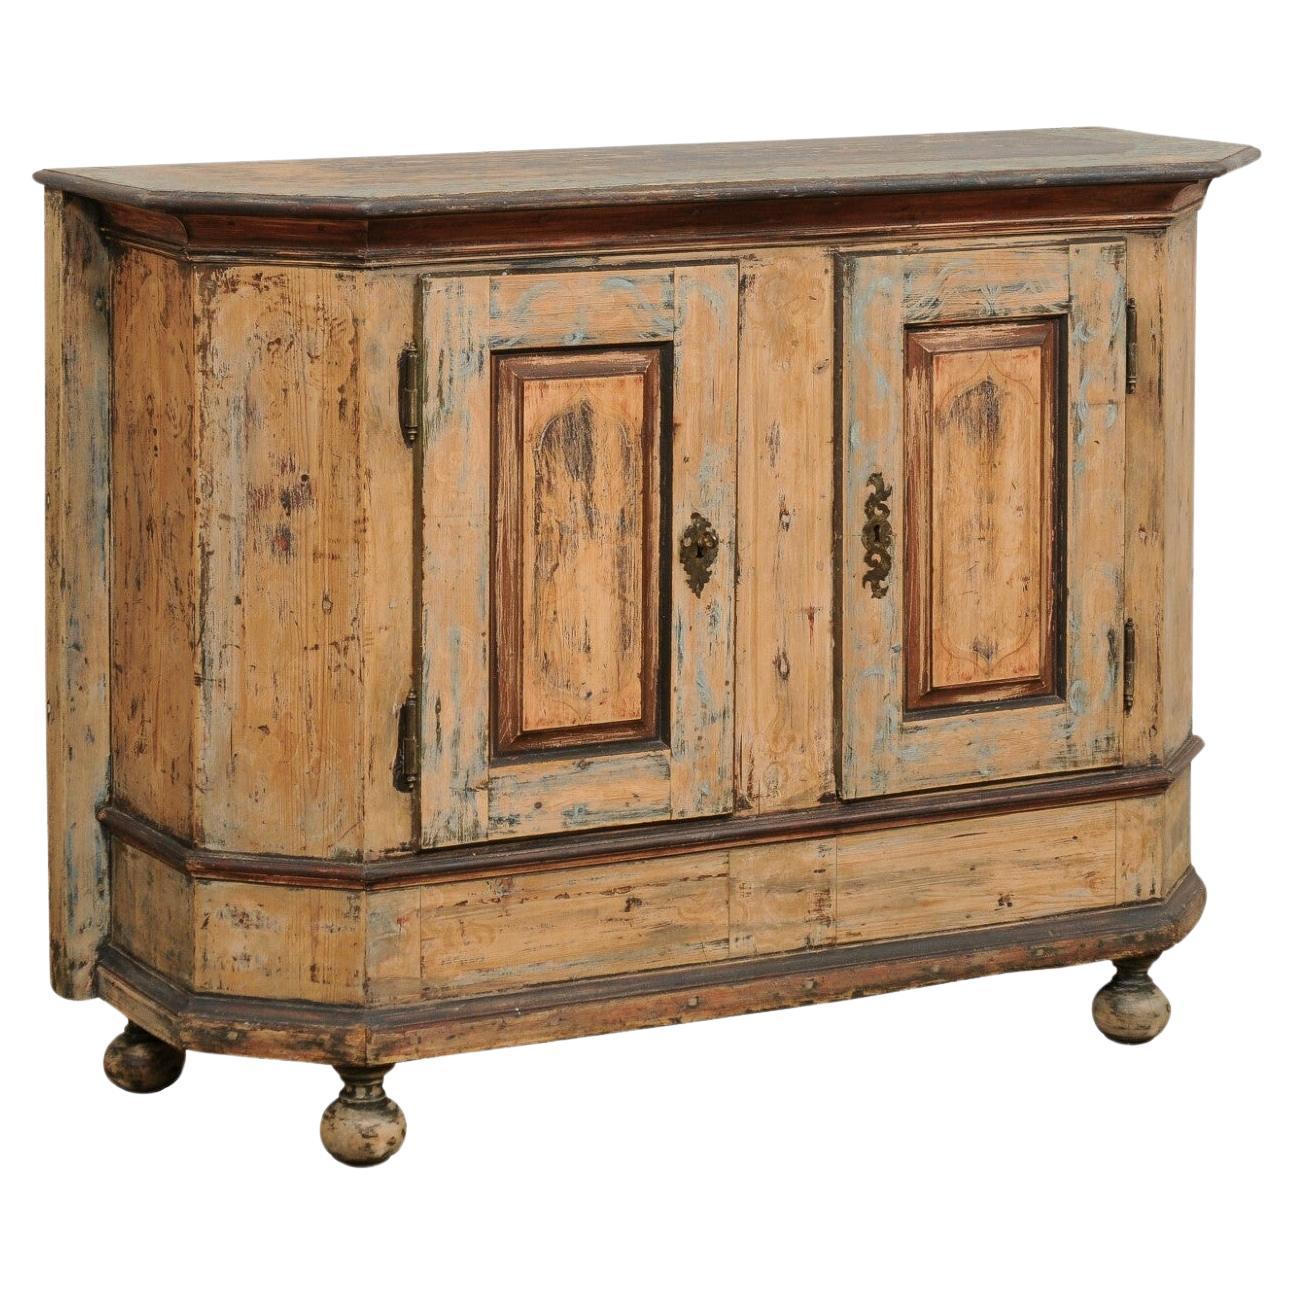 Italian 4.5 Ft. Wide Two-Door Wooden Credenza, Early 19th C. For Sale